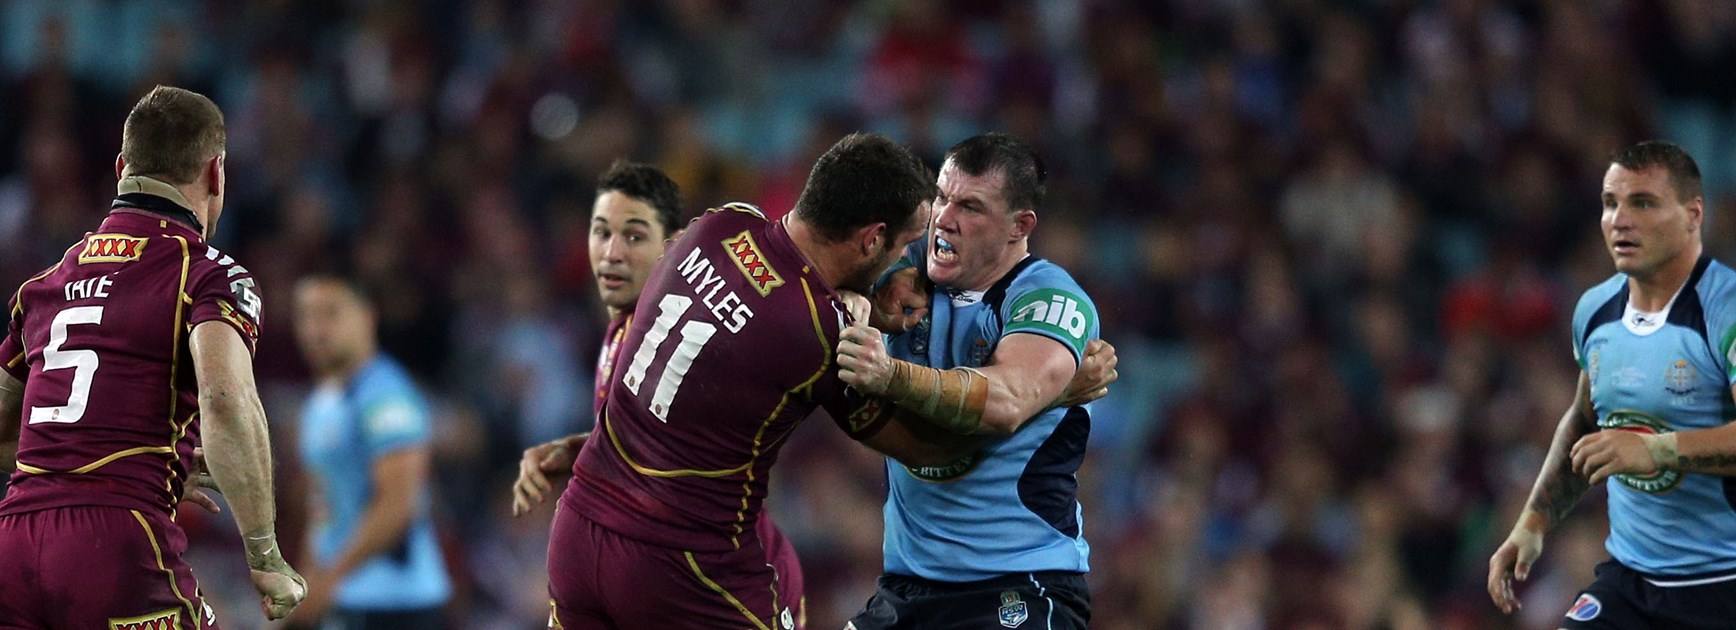 June 5: Gallen goes toe to toe with Myles; a Dally M winner was born